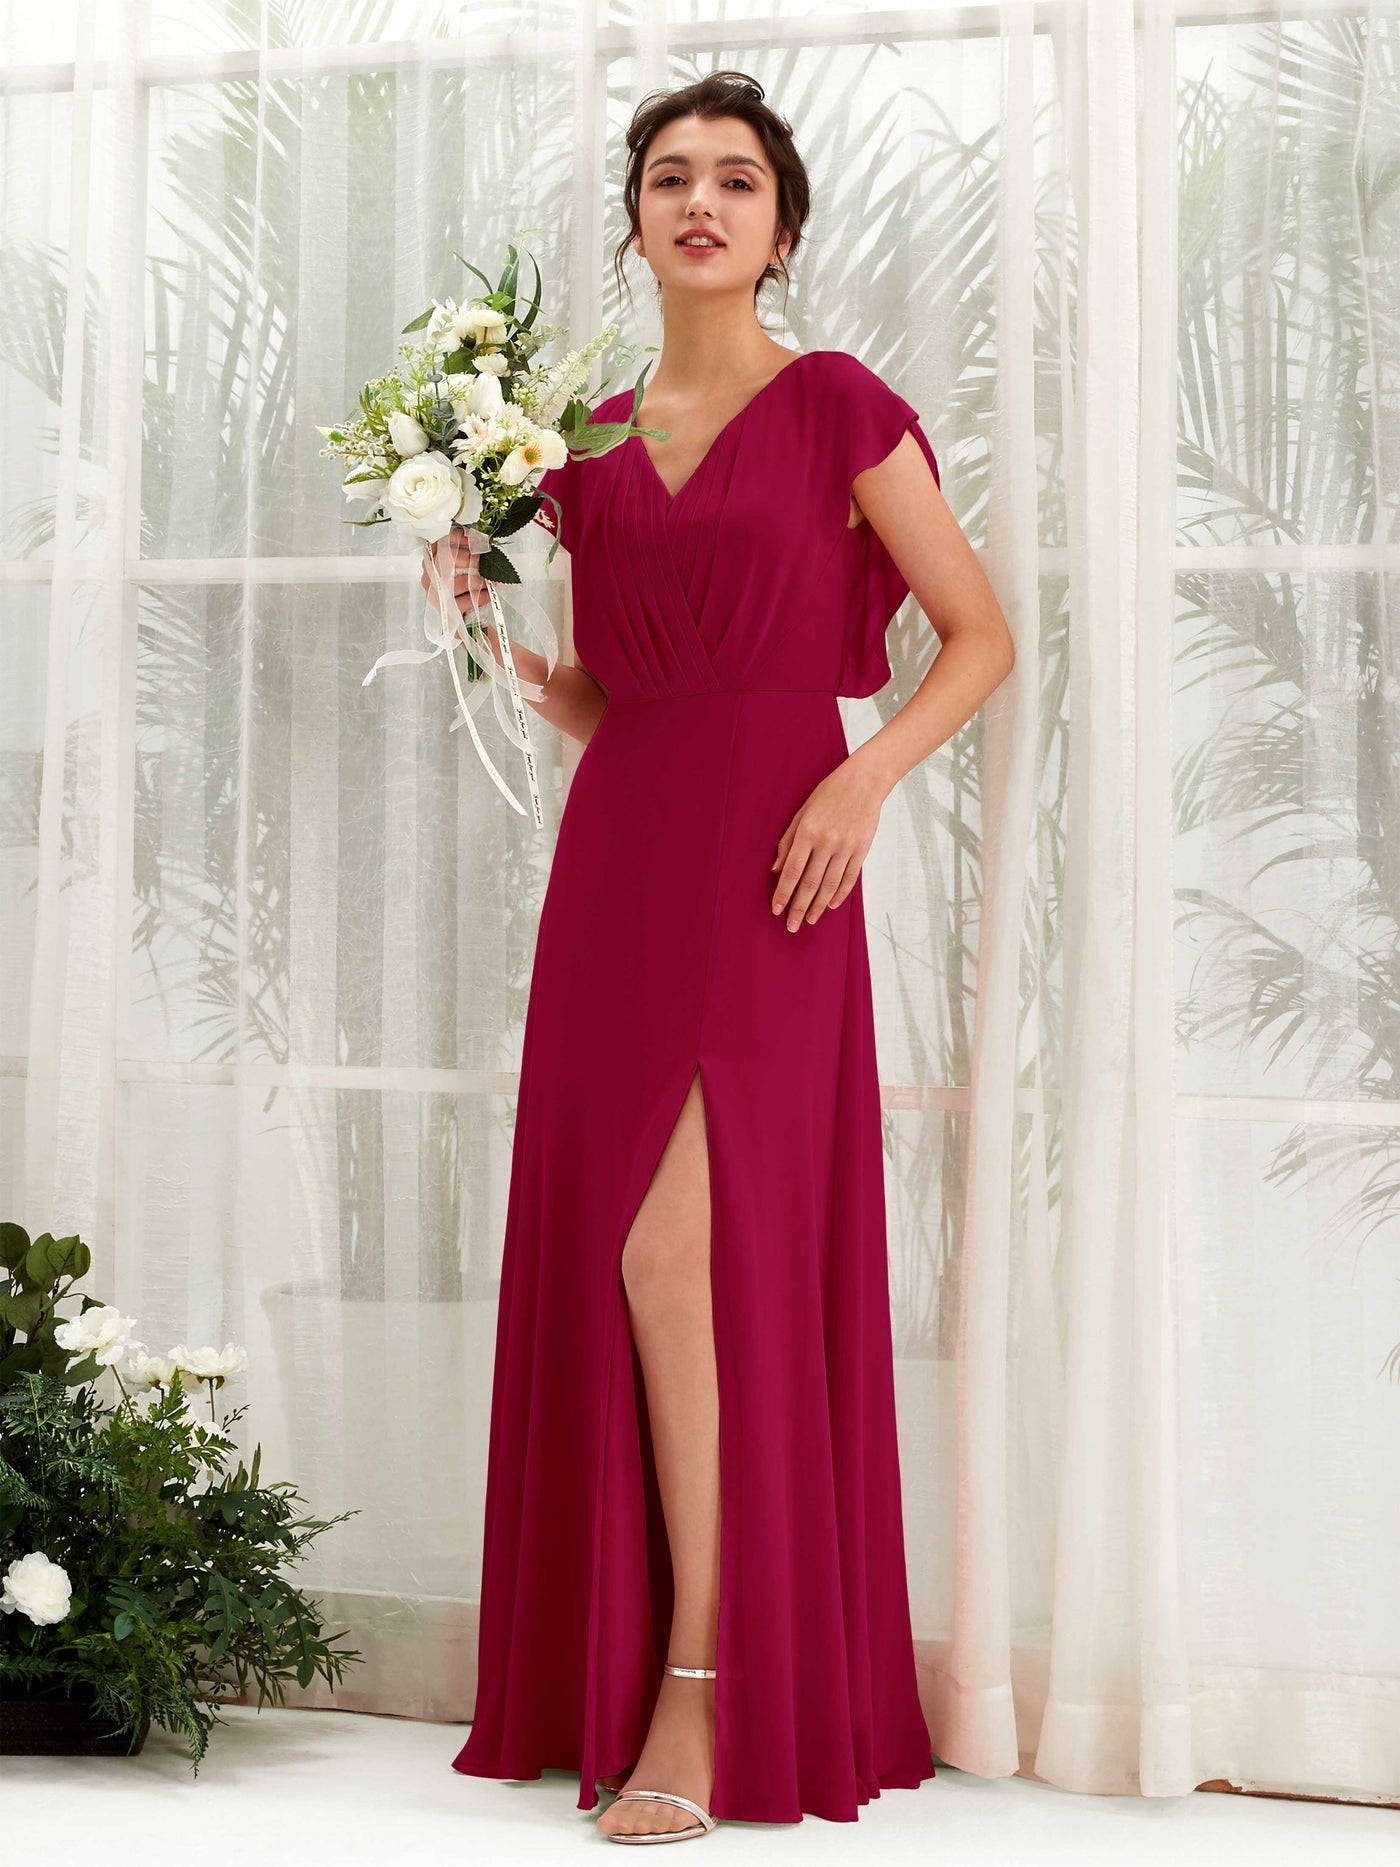 Jester Red Bridesmaid Dresses Bridesmaid Dress A-line Chiffon V-neck Full Length Short Sleeves Wedding Party Dress (81225641)#color_jester-red